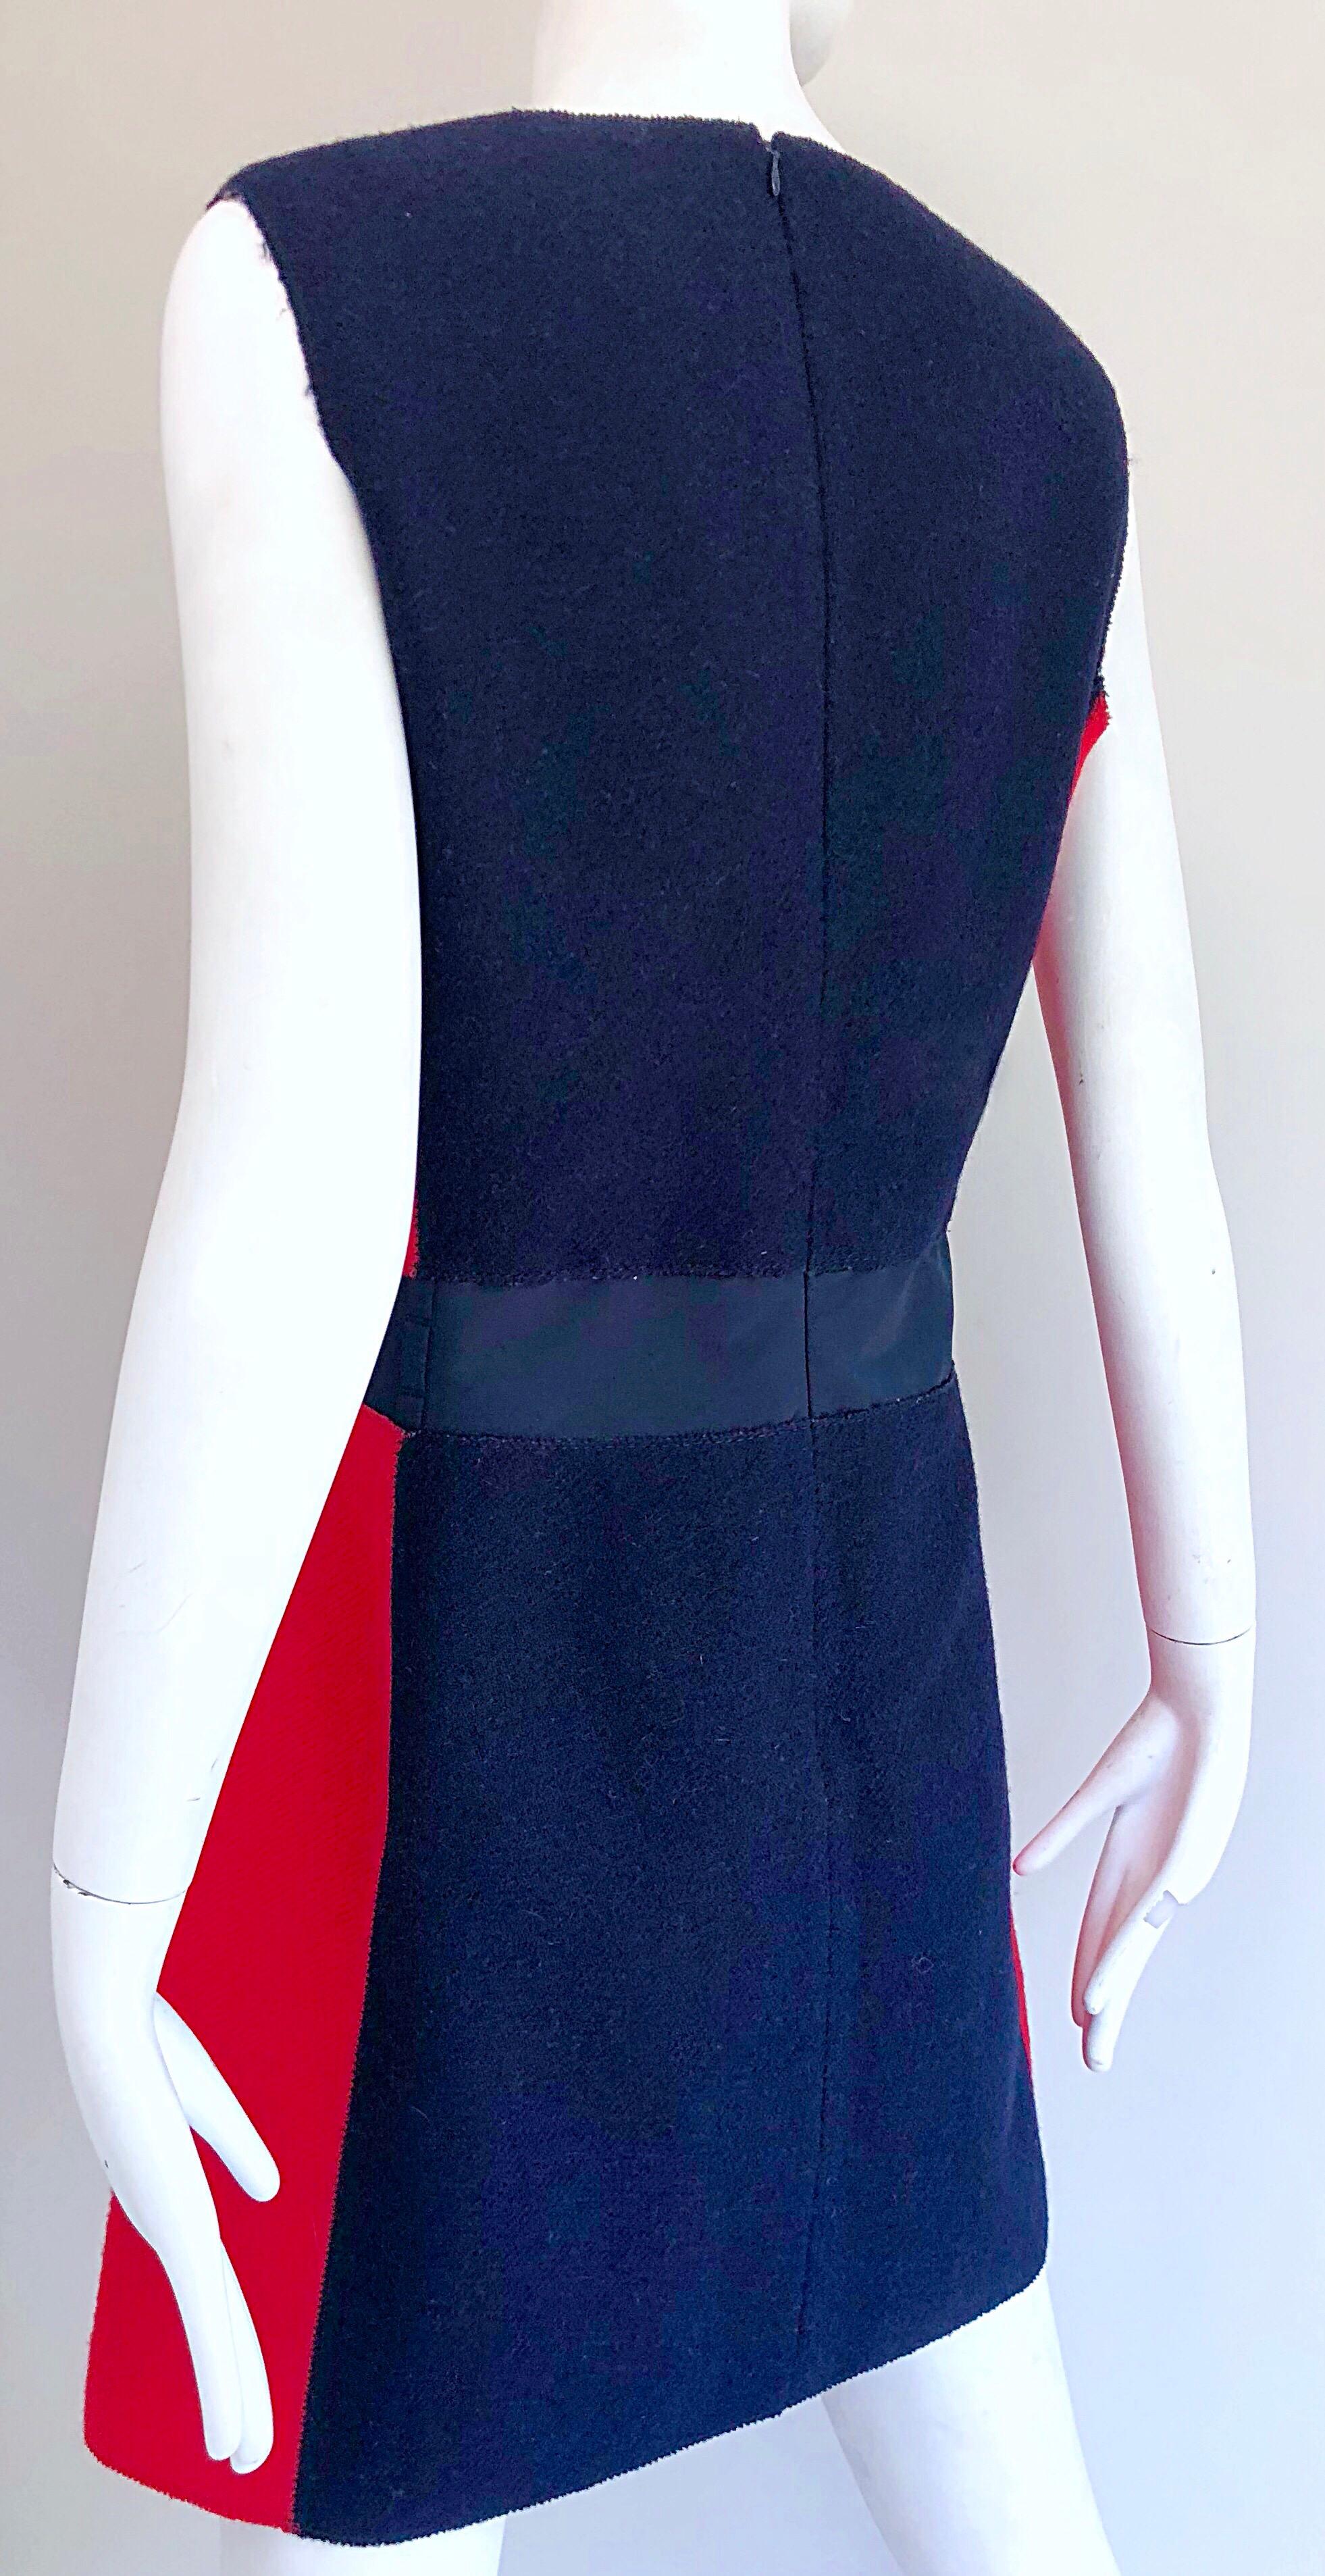 Miu Miu Early 2000s Navy Blue + Red Virgin Wool Size 44 US 8 A - Line Mod Dress For Sale 1